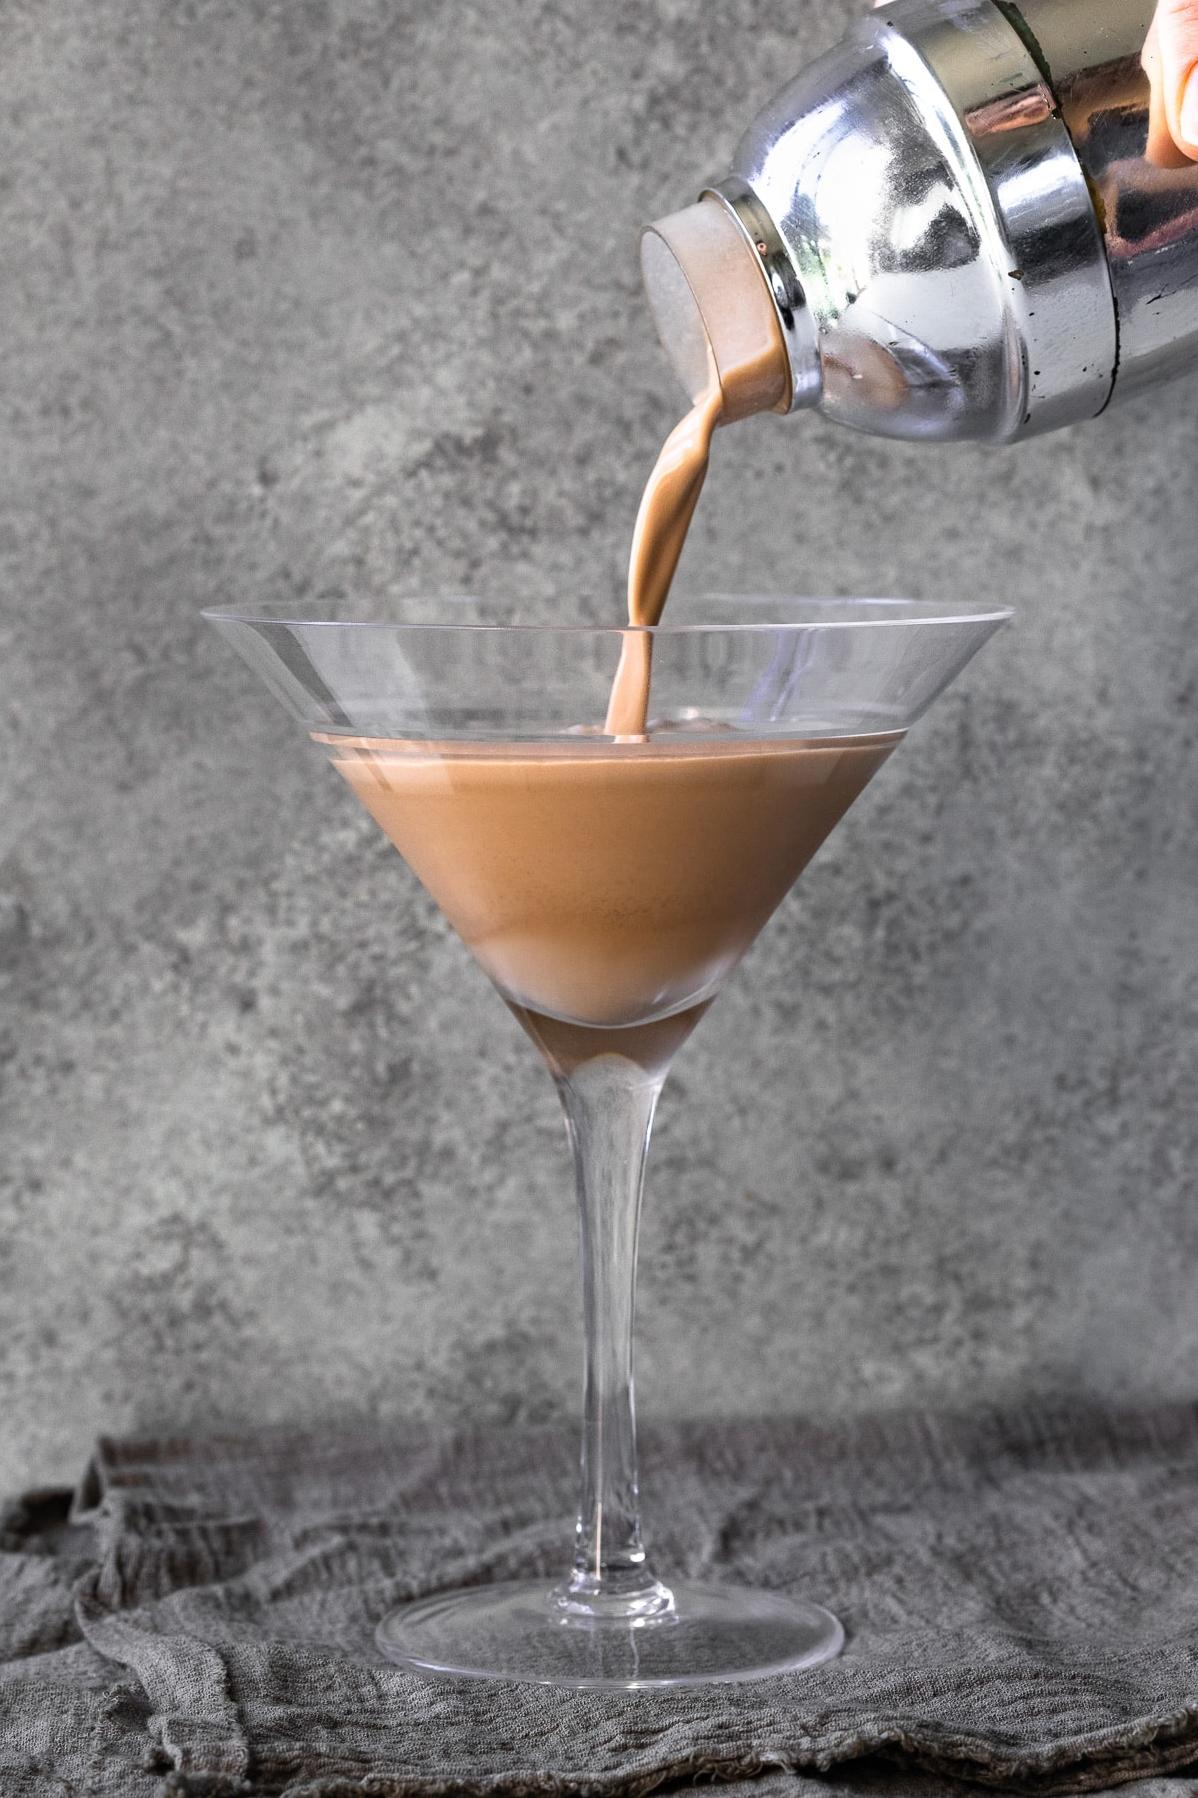  Kick back with a glass of homemade Irish cream and bask in the rich, creamy goodness.